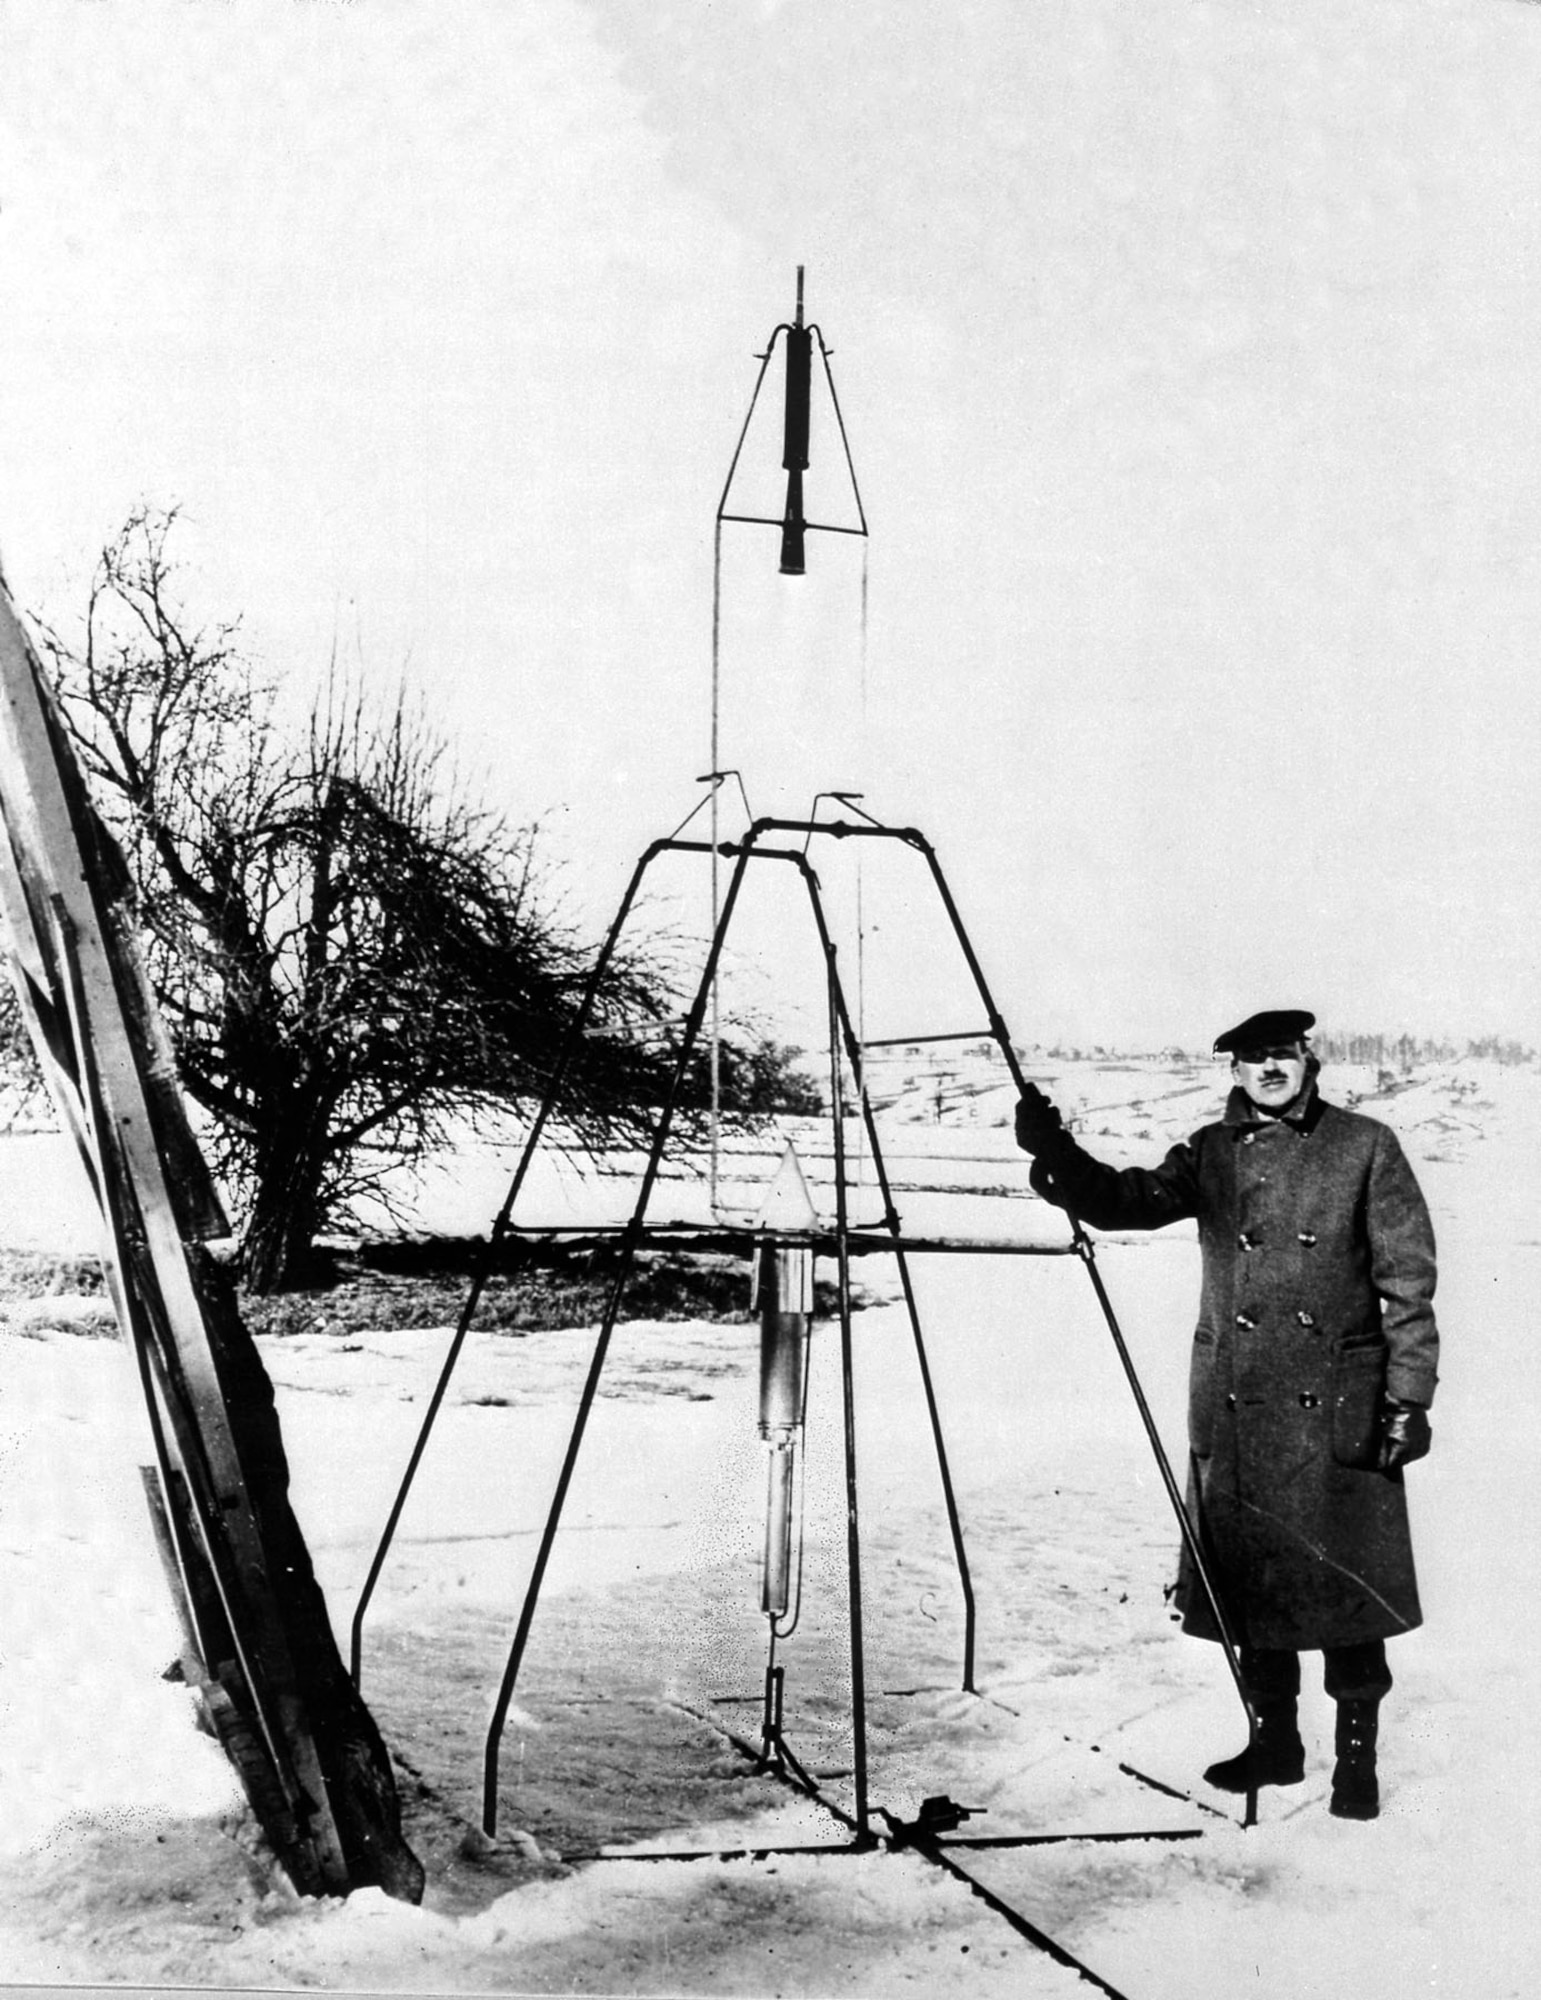 Goddard with the same 1926 rocket in its launch frame, Worcester, Mass. (U.S. Air Force photo)